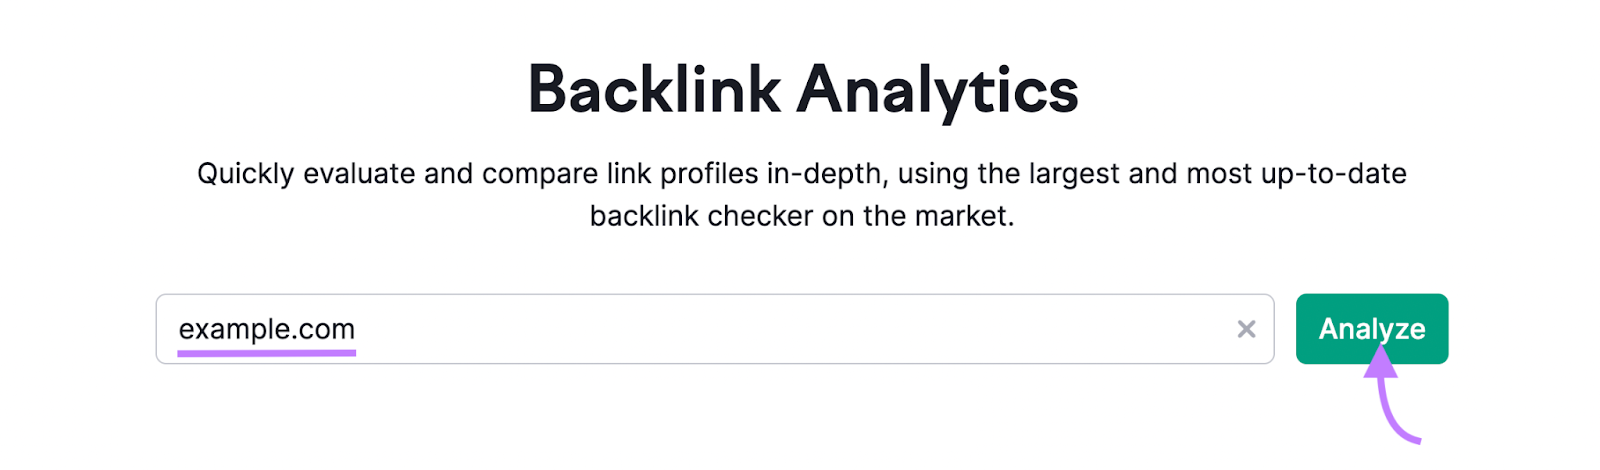 "example.com" entered into Backlink Analytics search bar